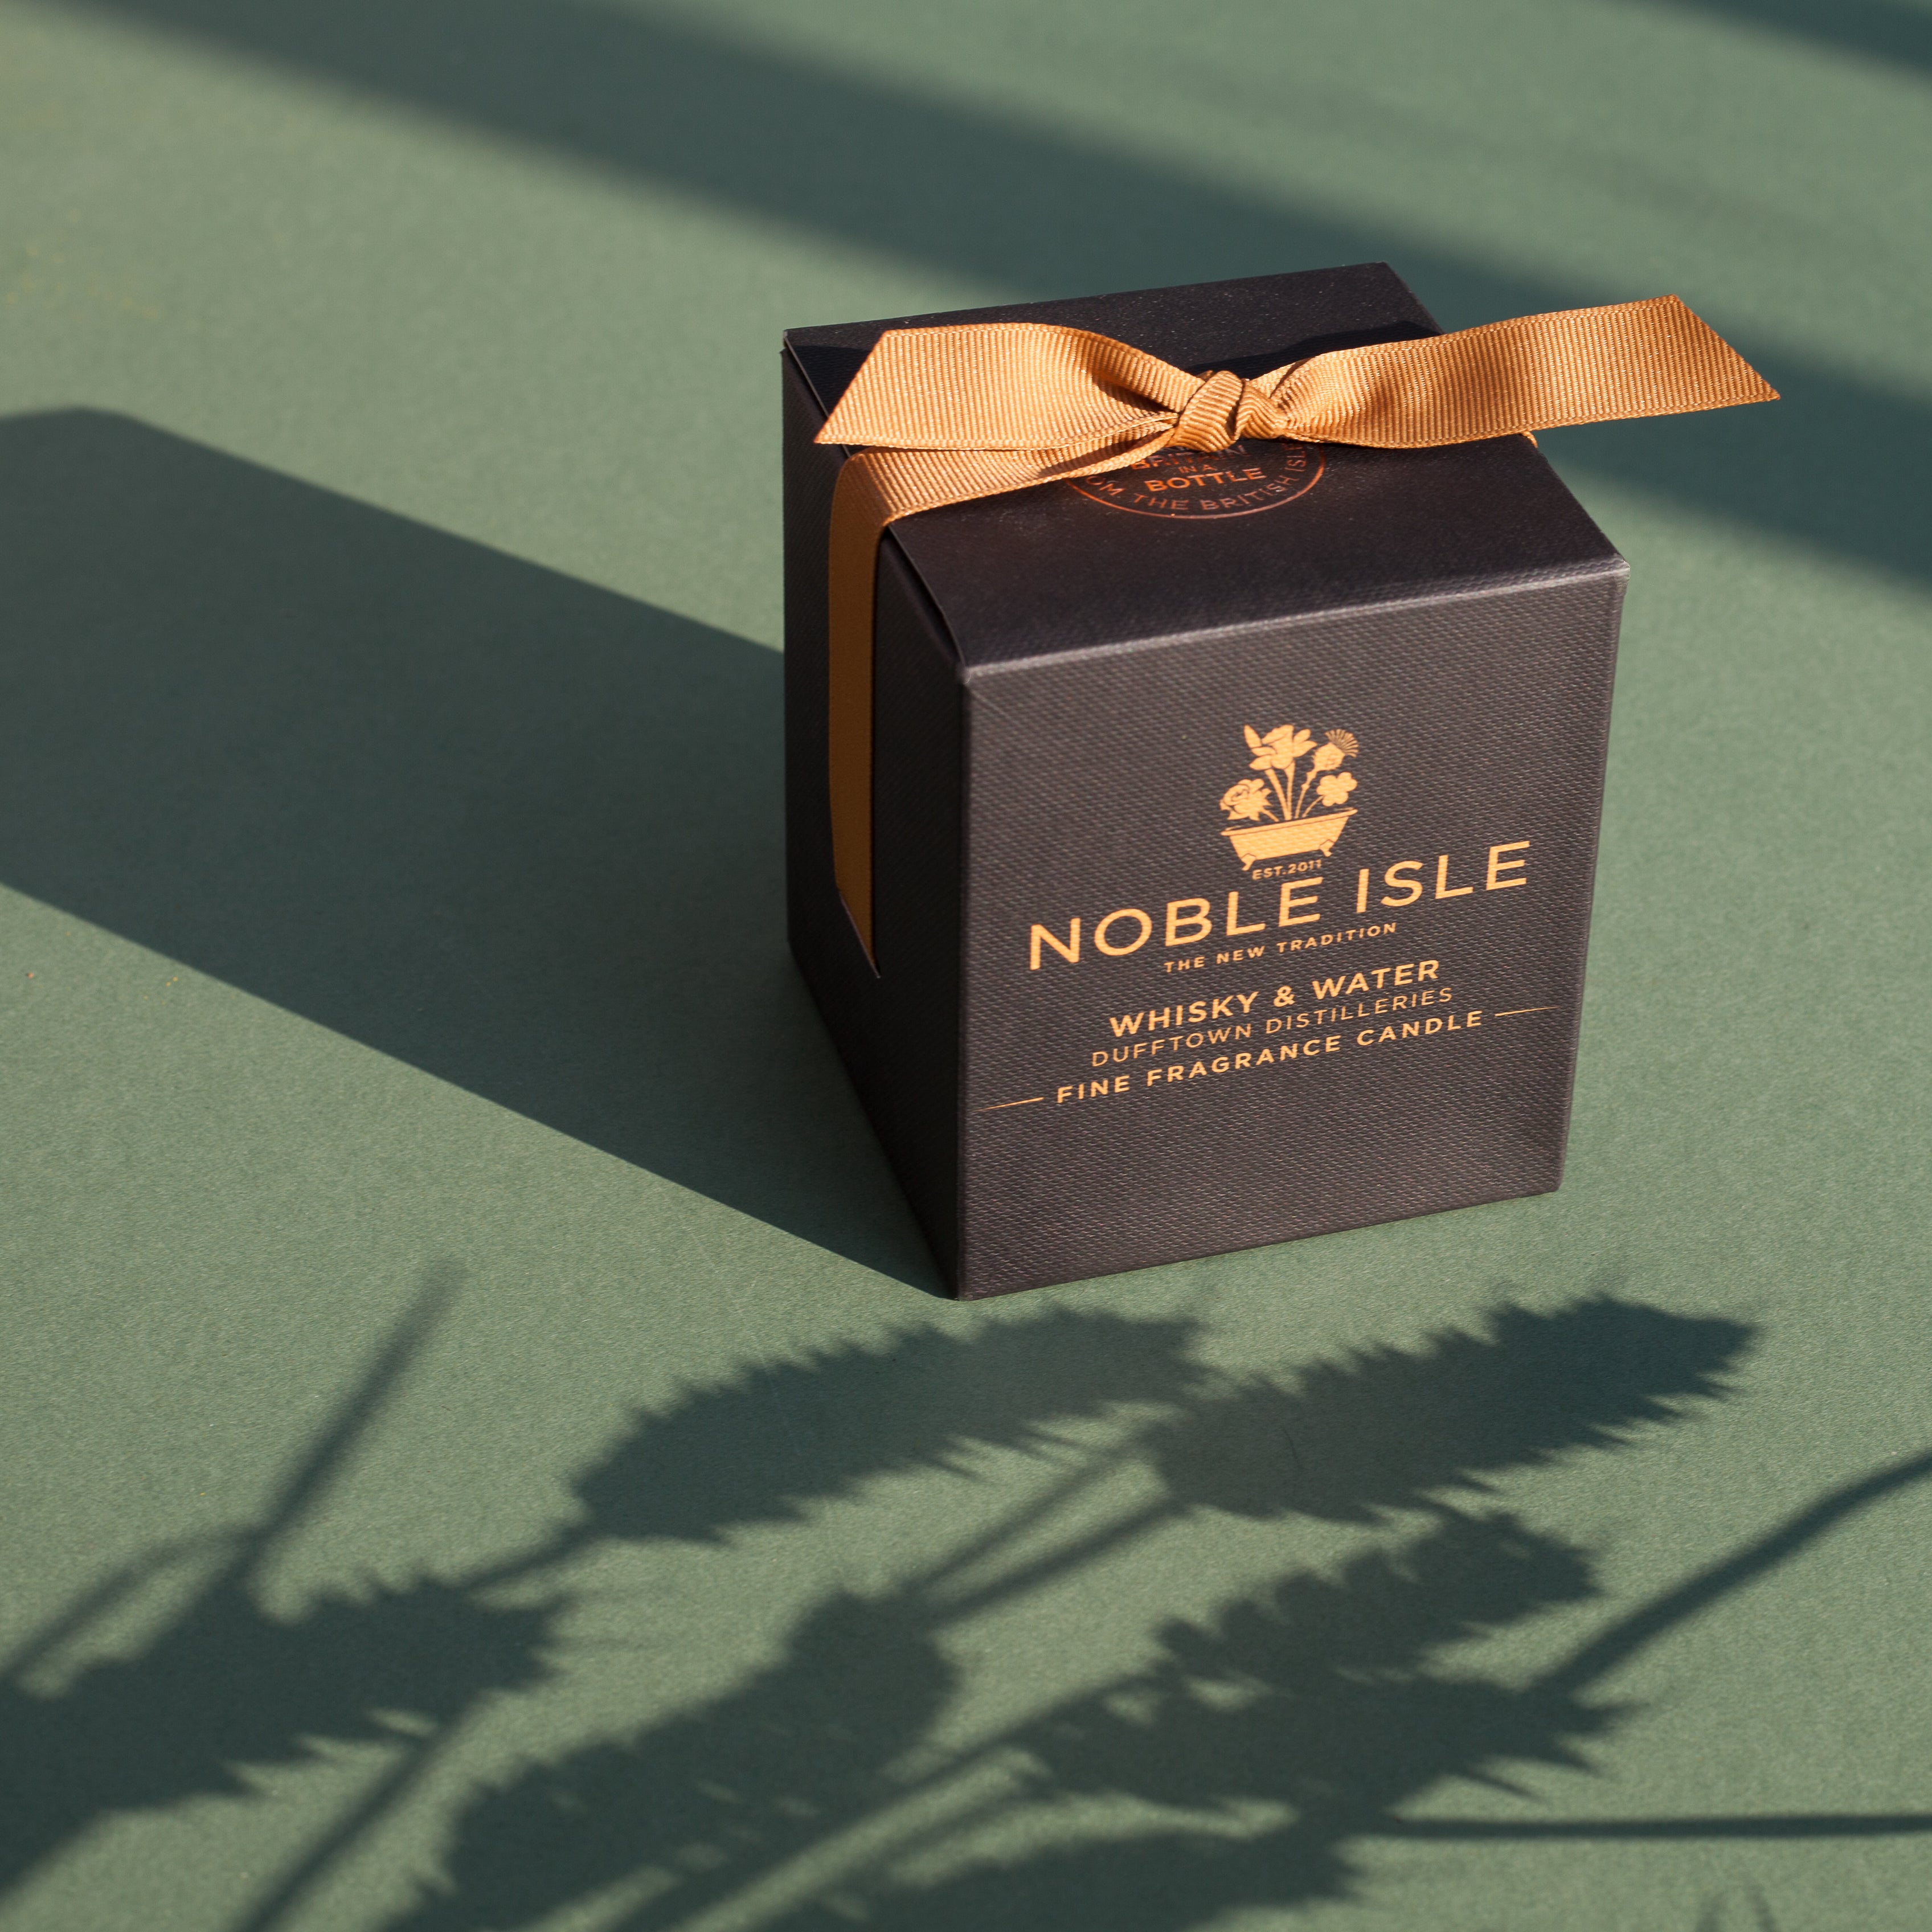 Whisky & Water by Noble Isle